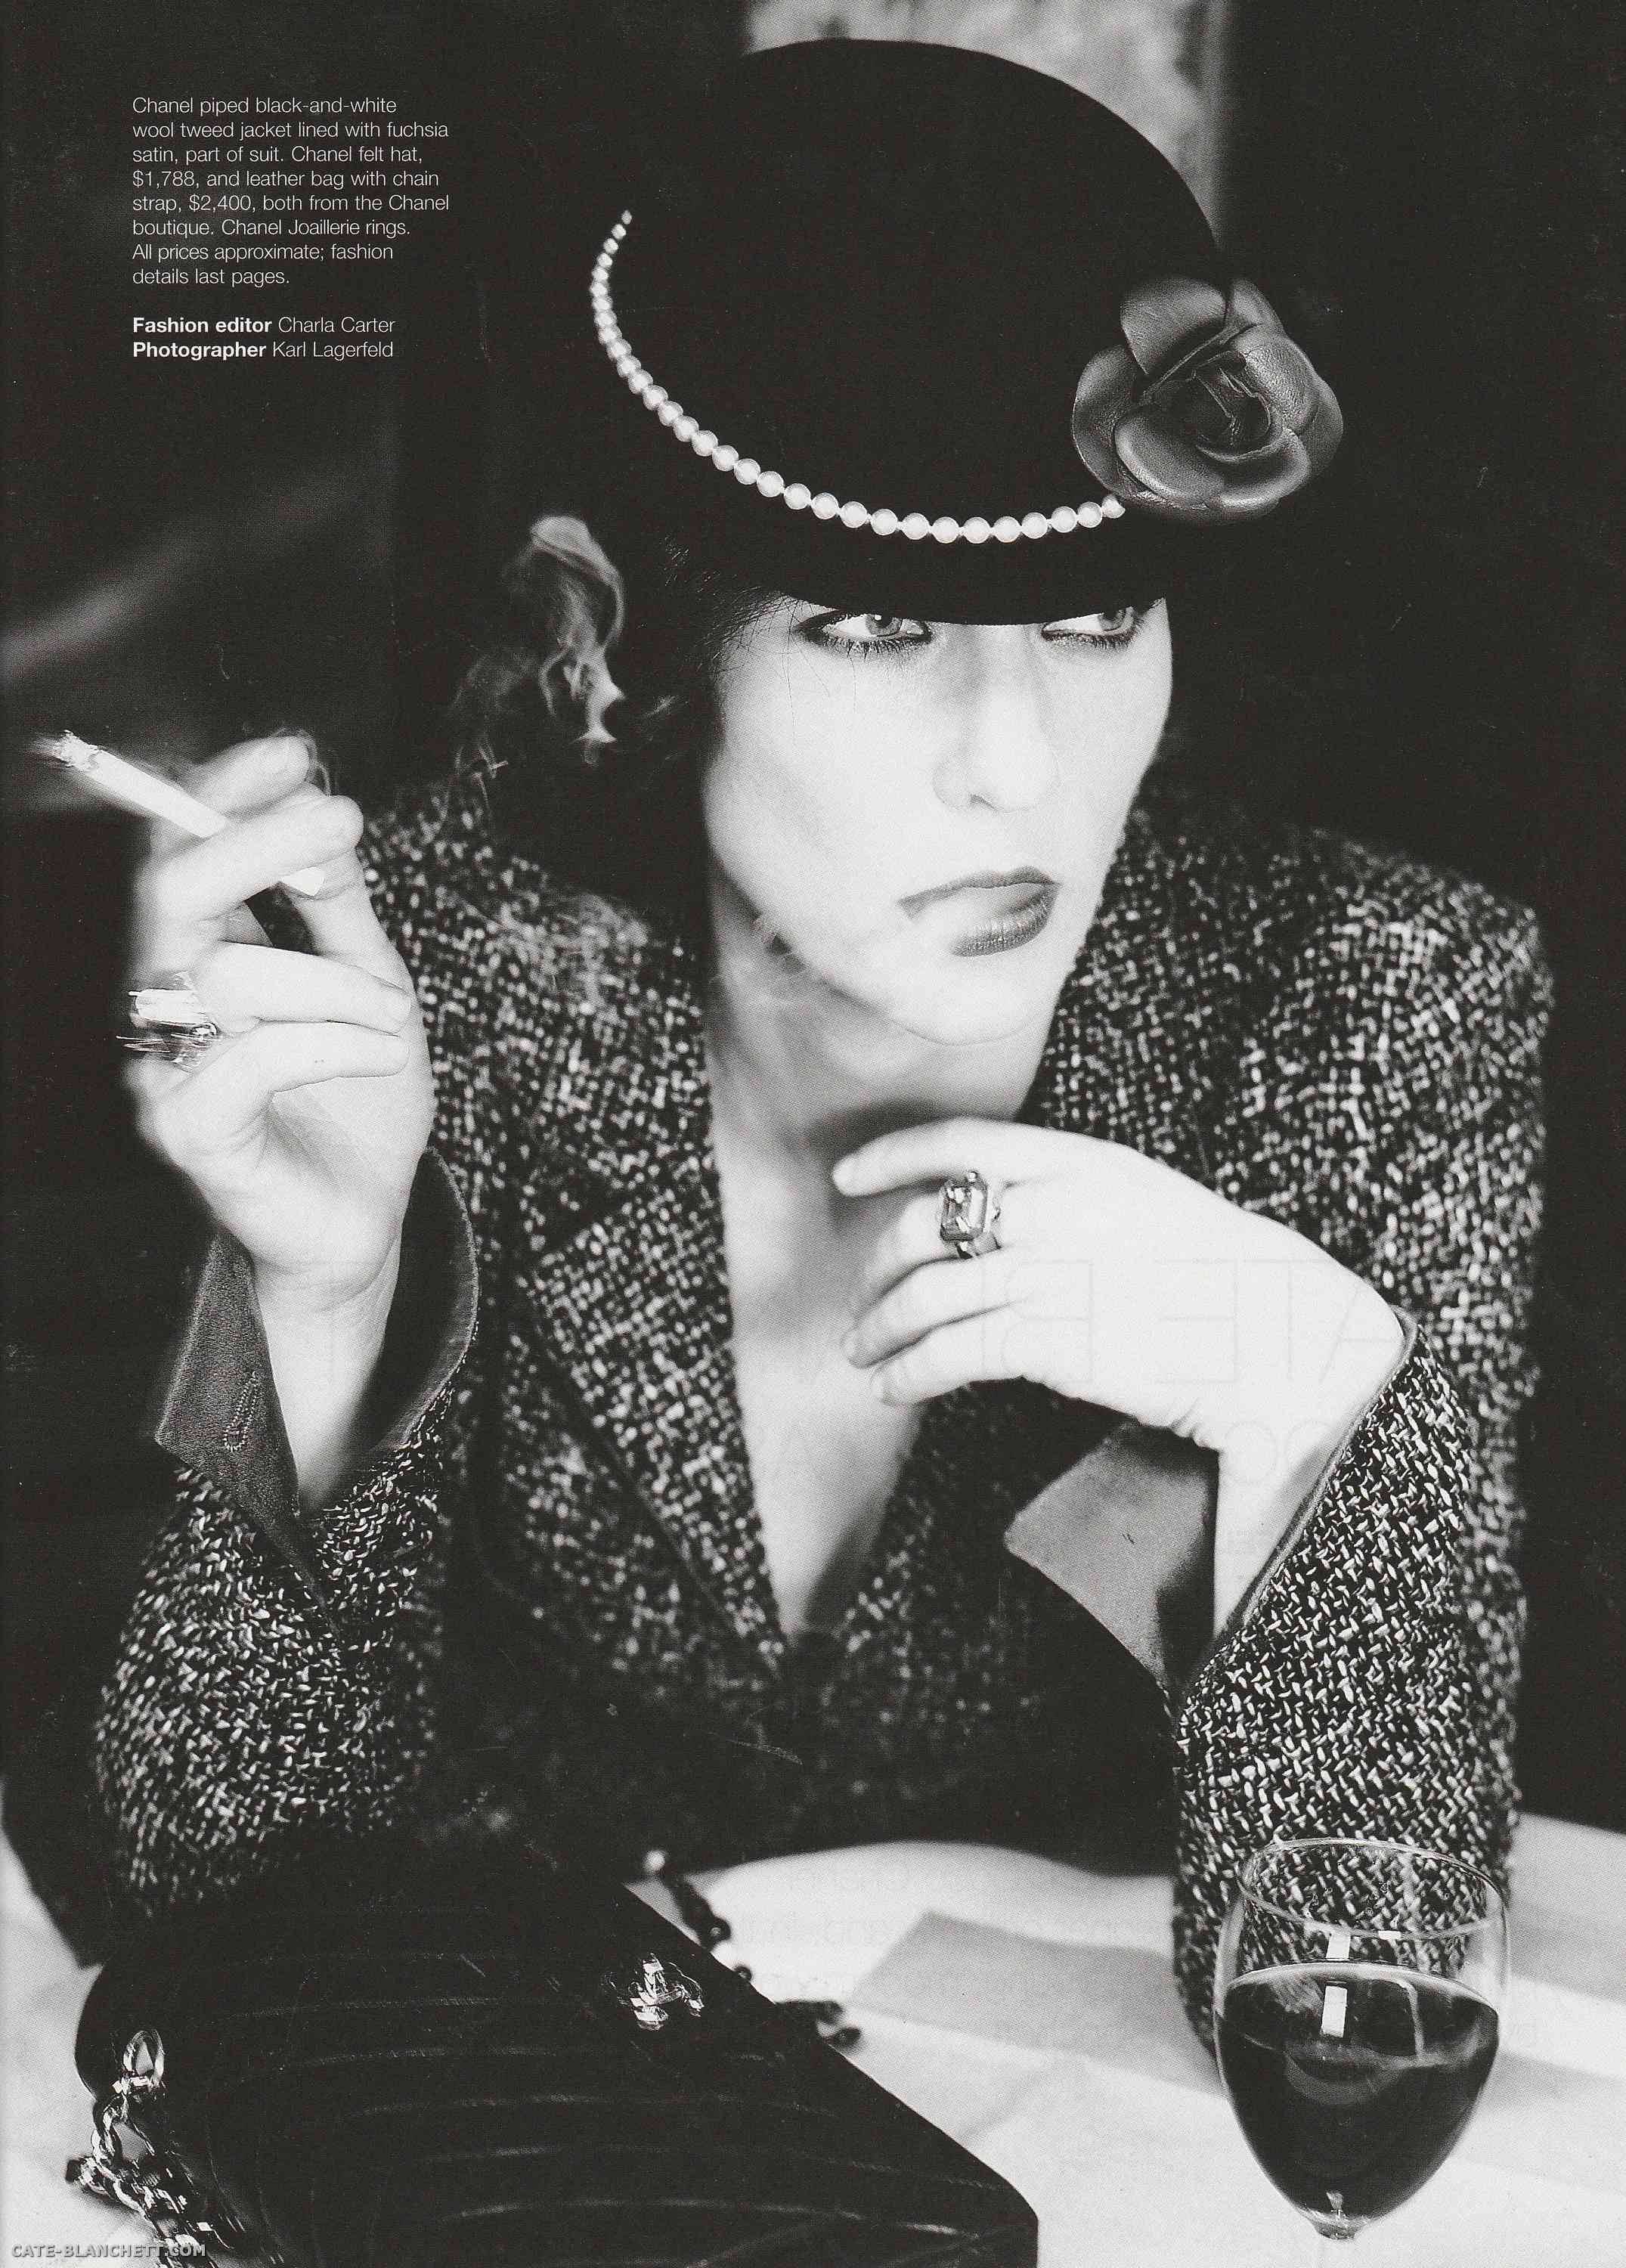 Cate Blanchett Fan on X: Cate Blanchett as Coco Chanel photographed by Karl  Lagerfeld #cbfvault #chanel #vogueaustralia  / X